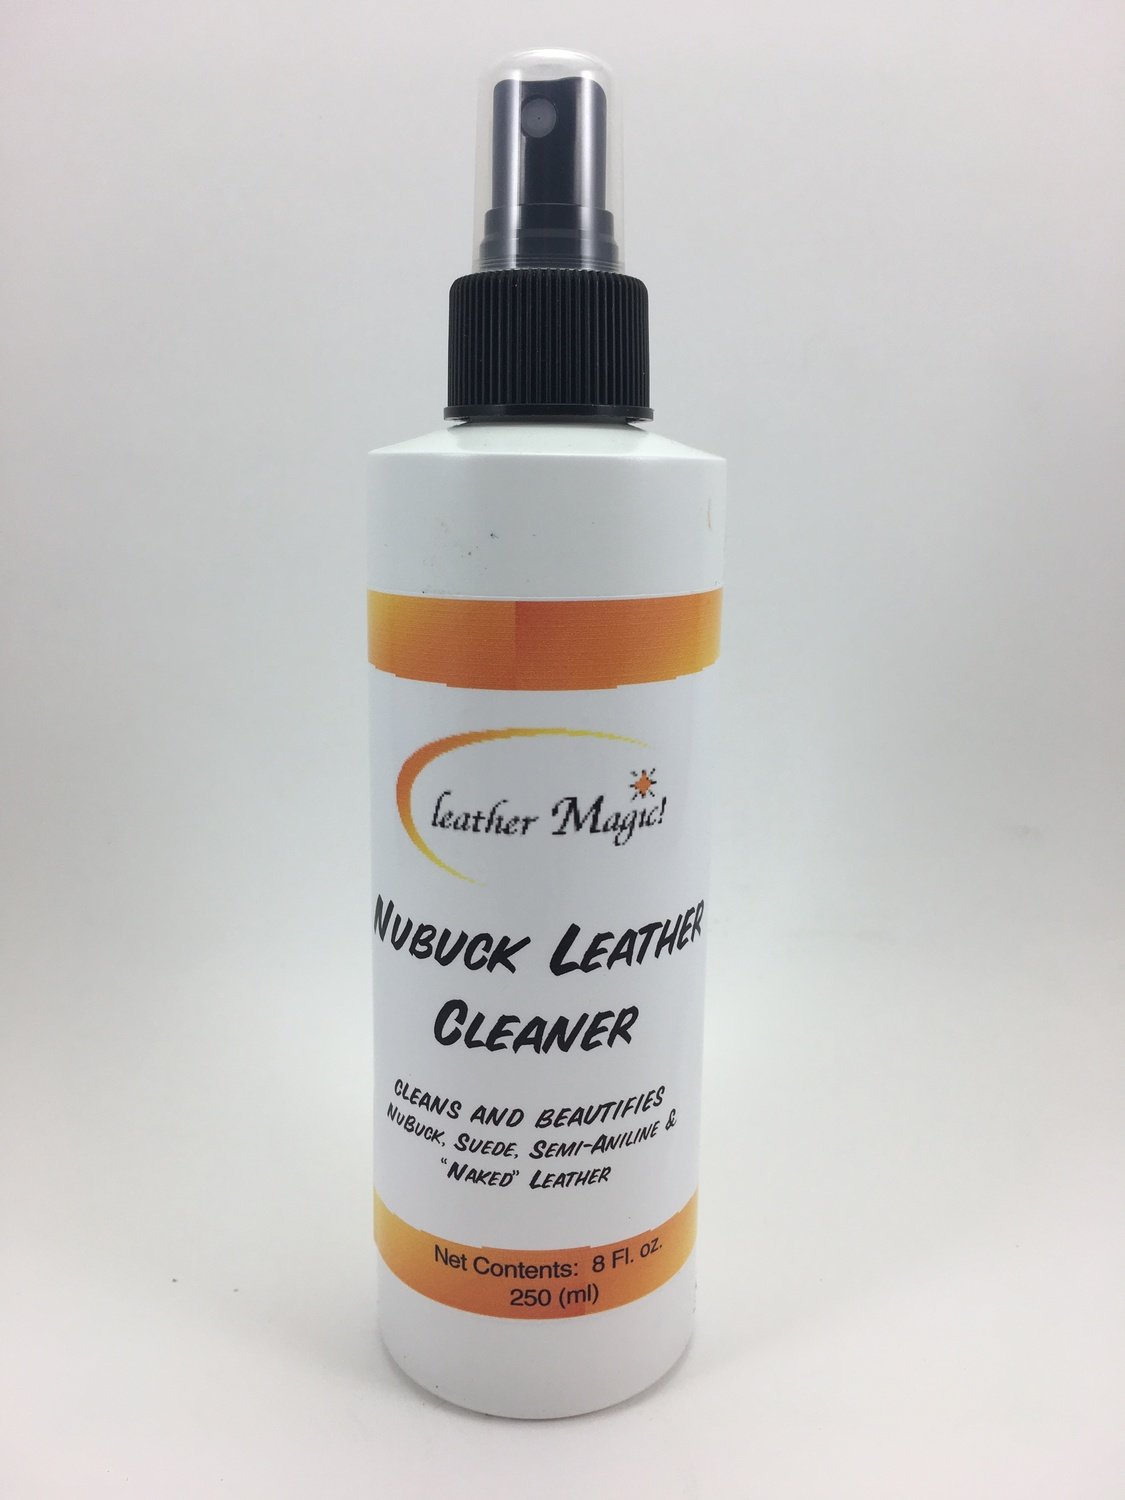 NuBuck/Suede Leather Cleaner